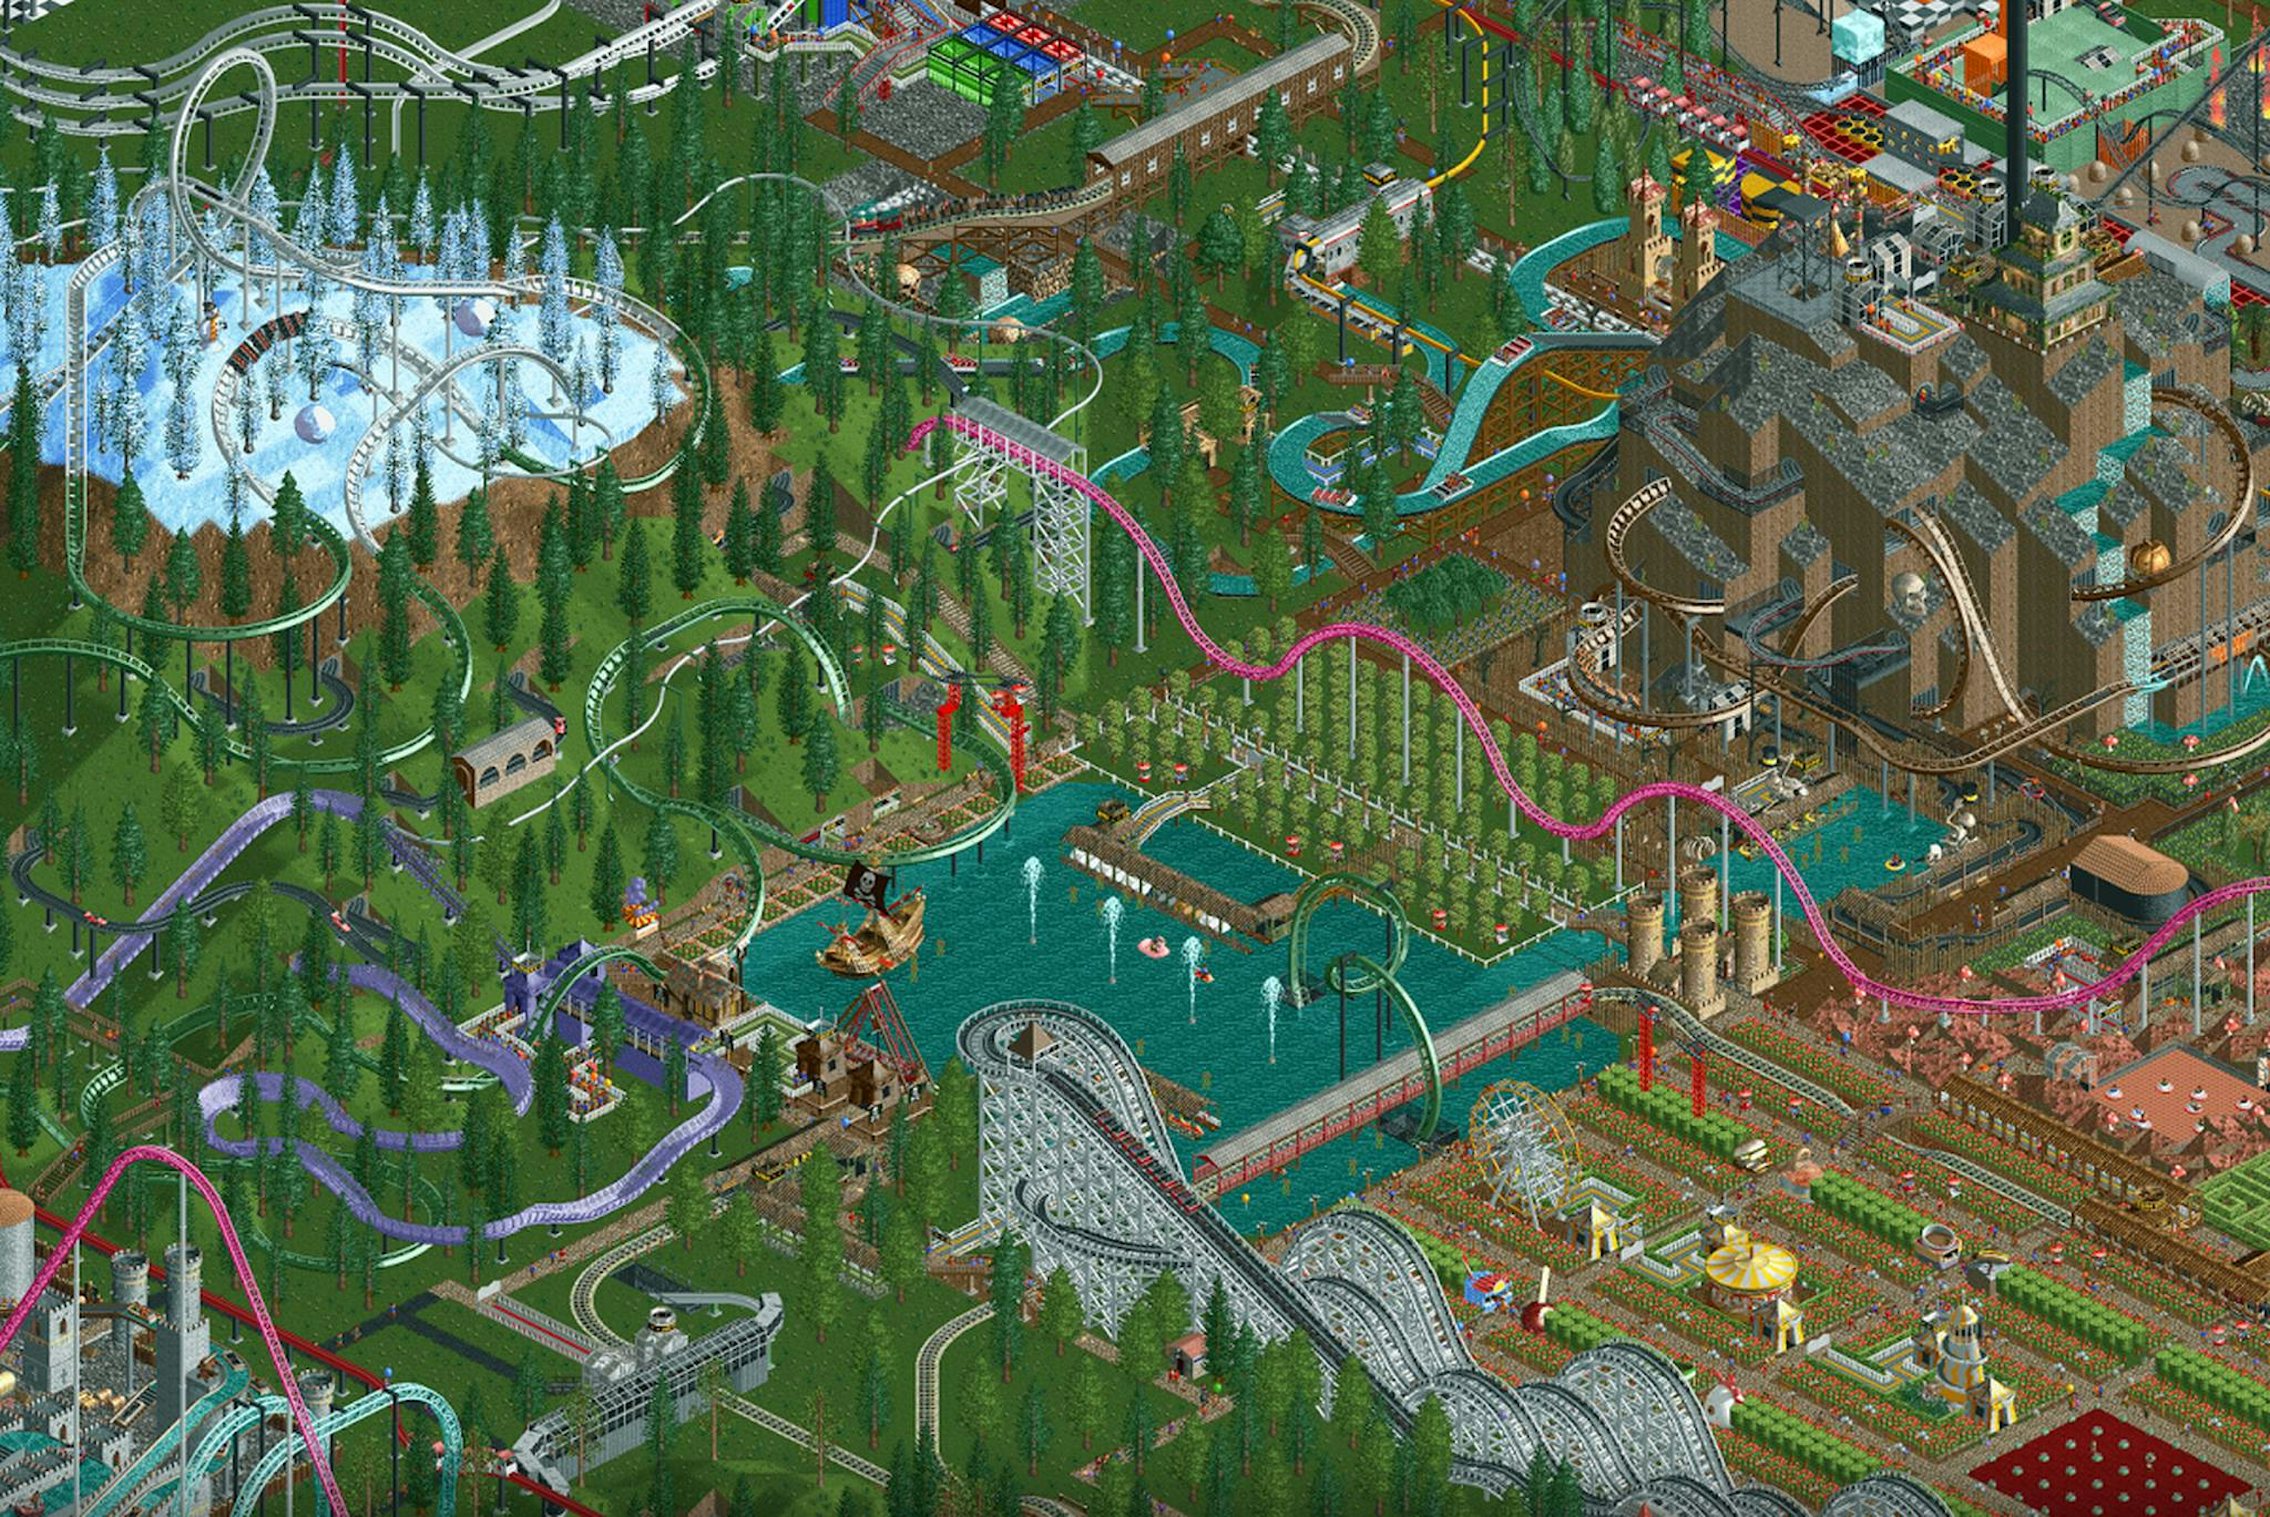 RollerCoaster Tycoon Classic - Jogo para Android e IOS 